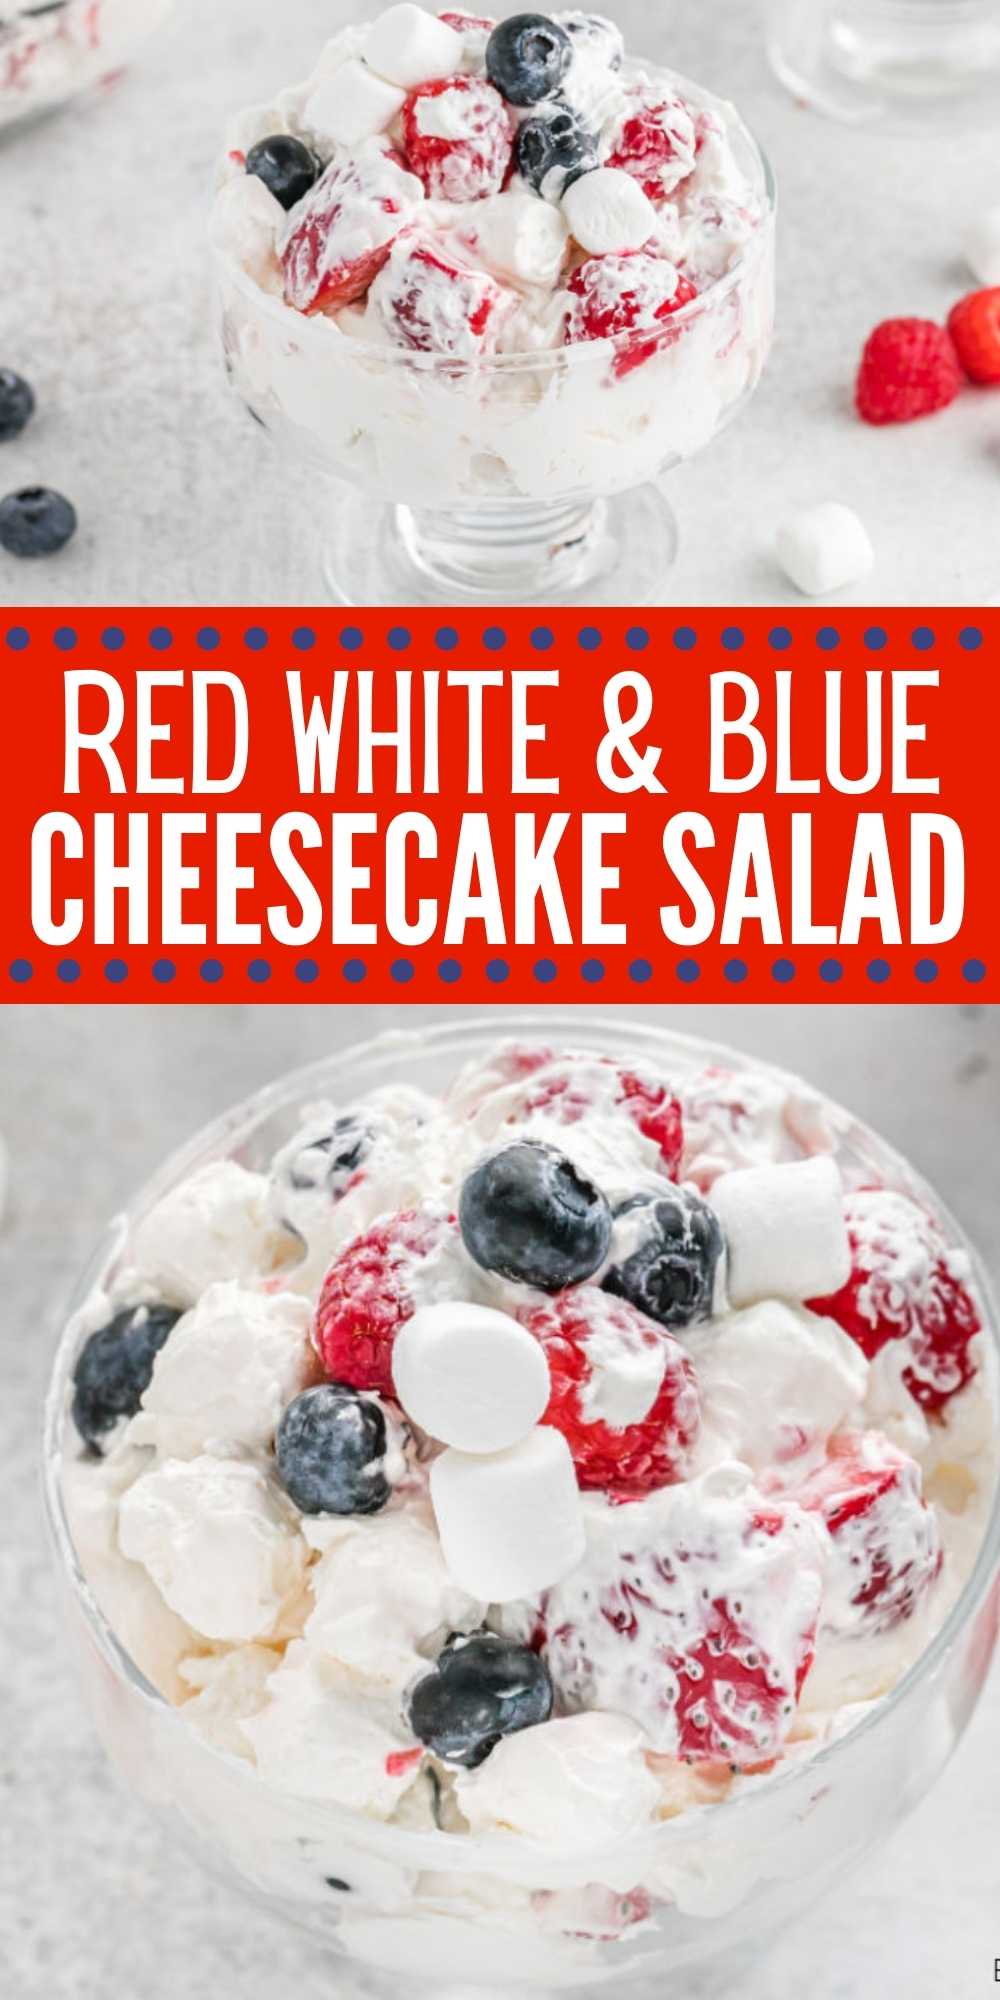 Creamy, delicious and easy to make this Red White and Blue Cheesecake Salad is the perfect recipe for all your patriotic plans. This easy desserts is perfect for Memorial Day or the 4th of July and is a crowd pleaser too! #eatingonadime #nobakedesserts #fruitrecipes #redwhiteandbluedesserts 